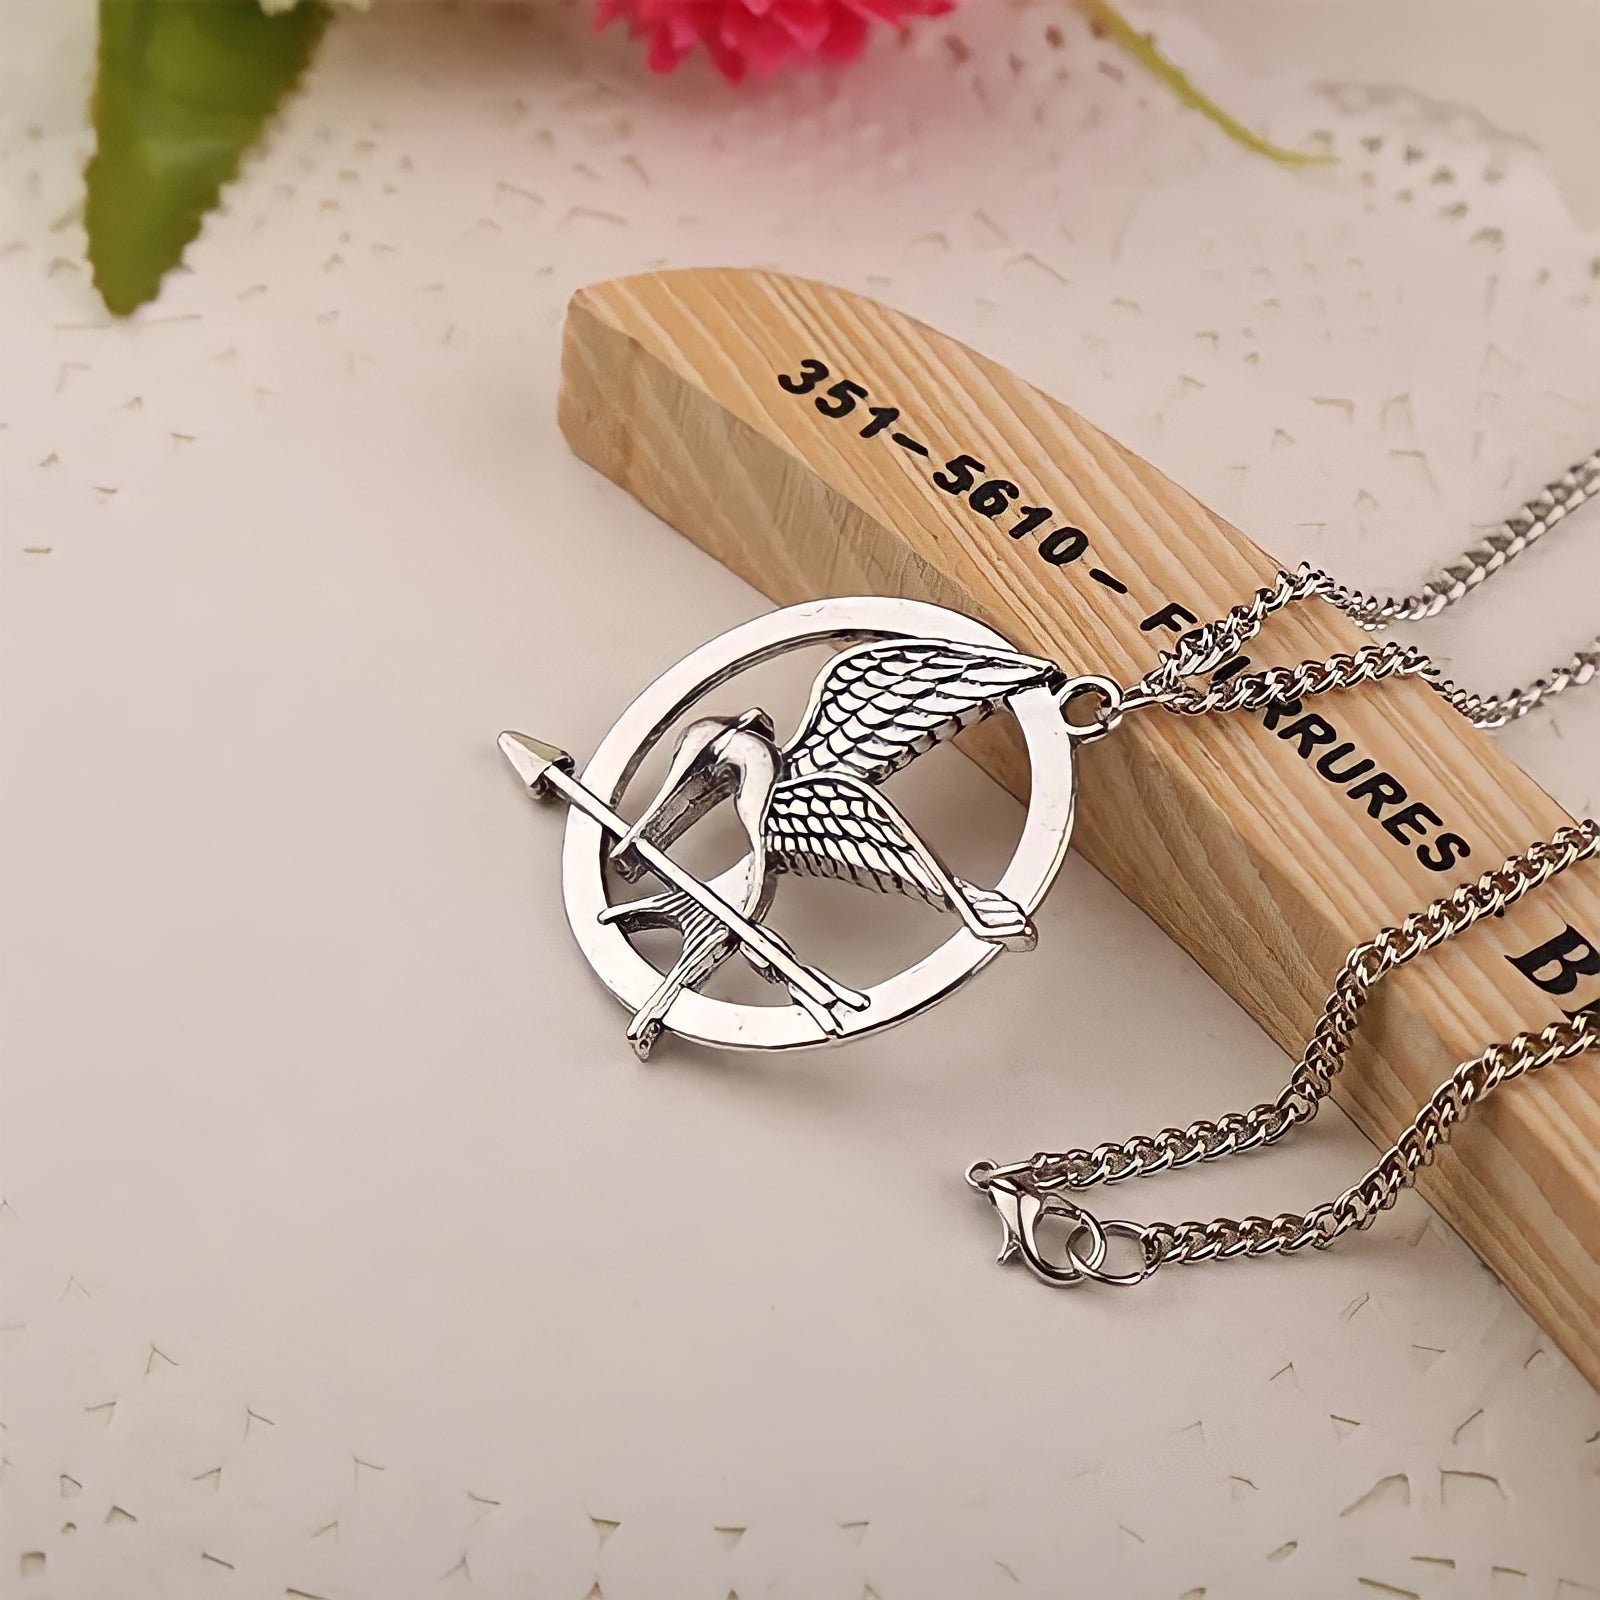 Hunger Games Necklace